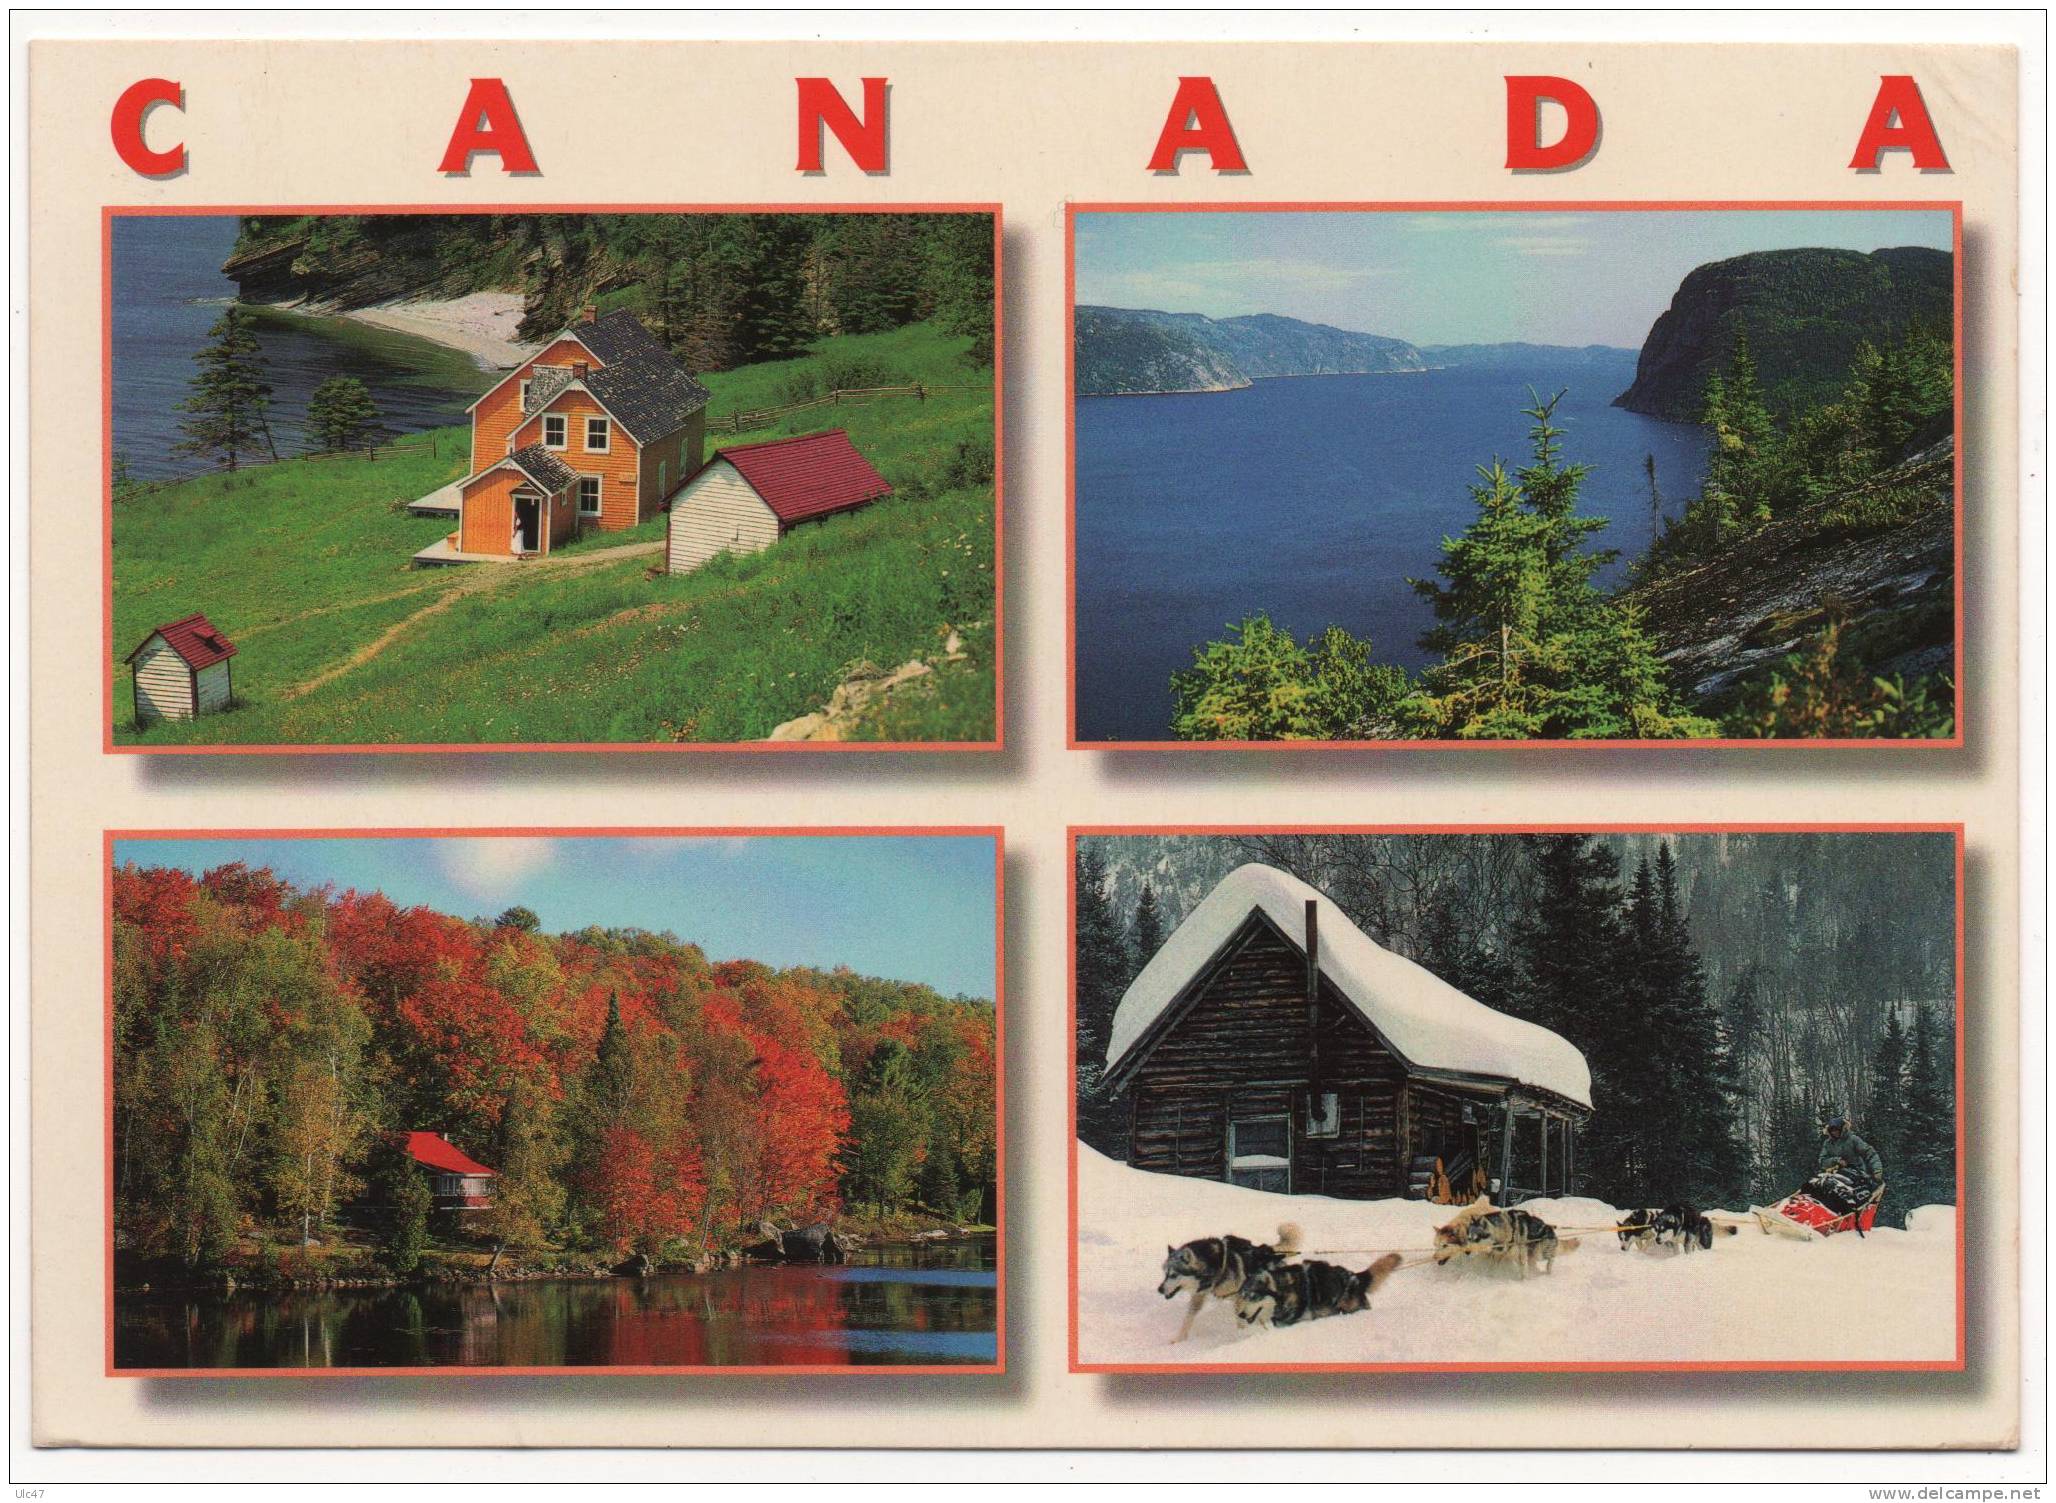 - CANADA. - SCENICS, CONTRASTS AND SEASONS. - (17x12cm.) - Scan Verso - - Modern Cards